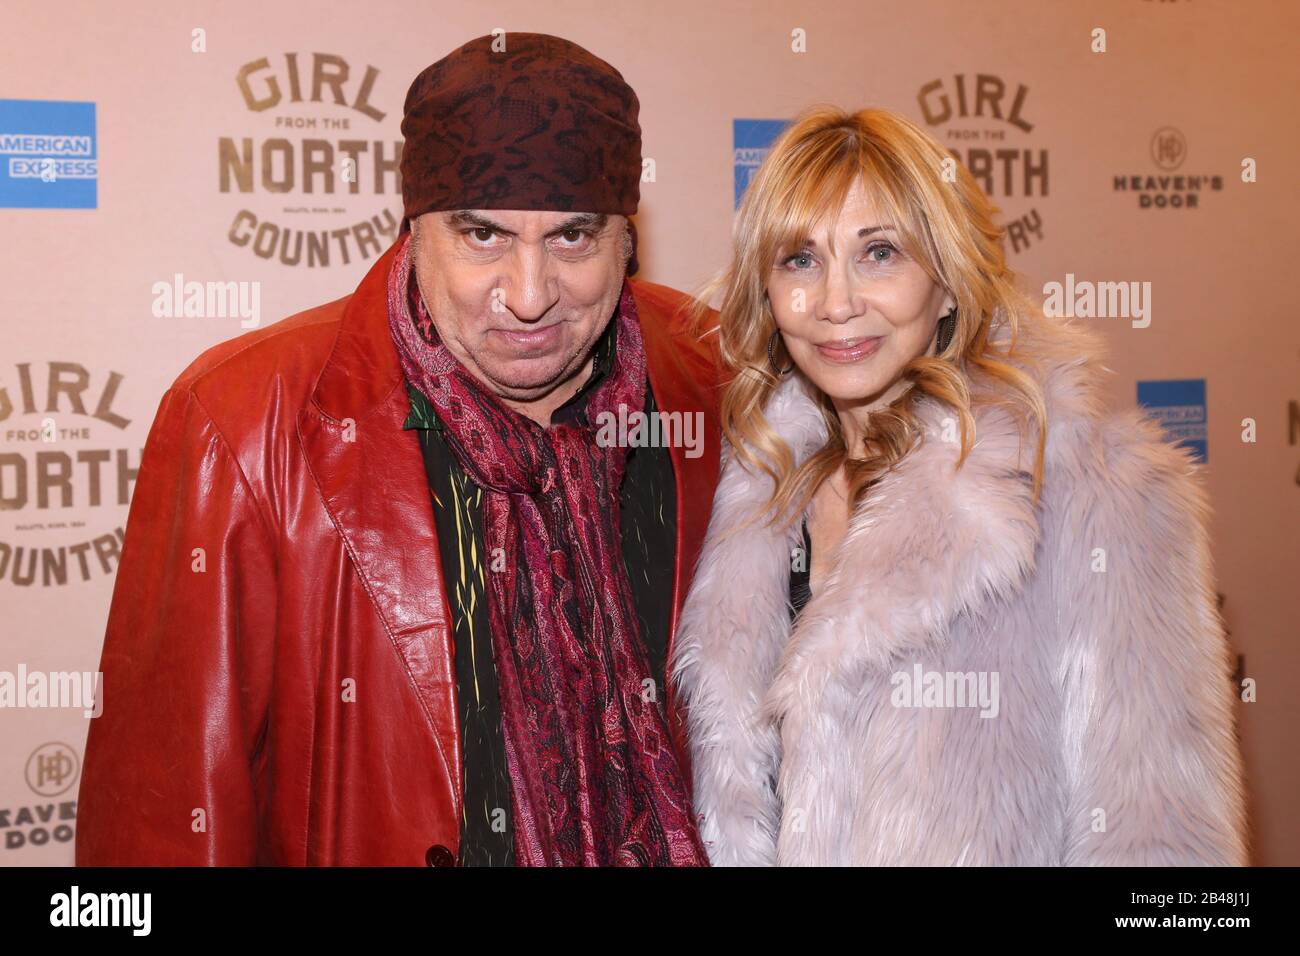 New York, NY, USA. 5th Mar, 2020. Steven Van Zandt and Maureen Van Zandt at the opening night arrivals for Girl From the North Country at the Belasco Theatre on March 5, 2020, in New York City. Credit: Joseph Marzullo/Media Punch/Alamy Live News Stock Photo